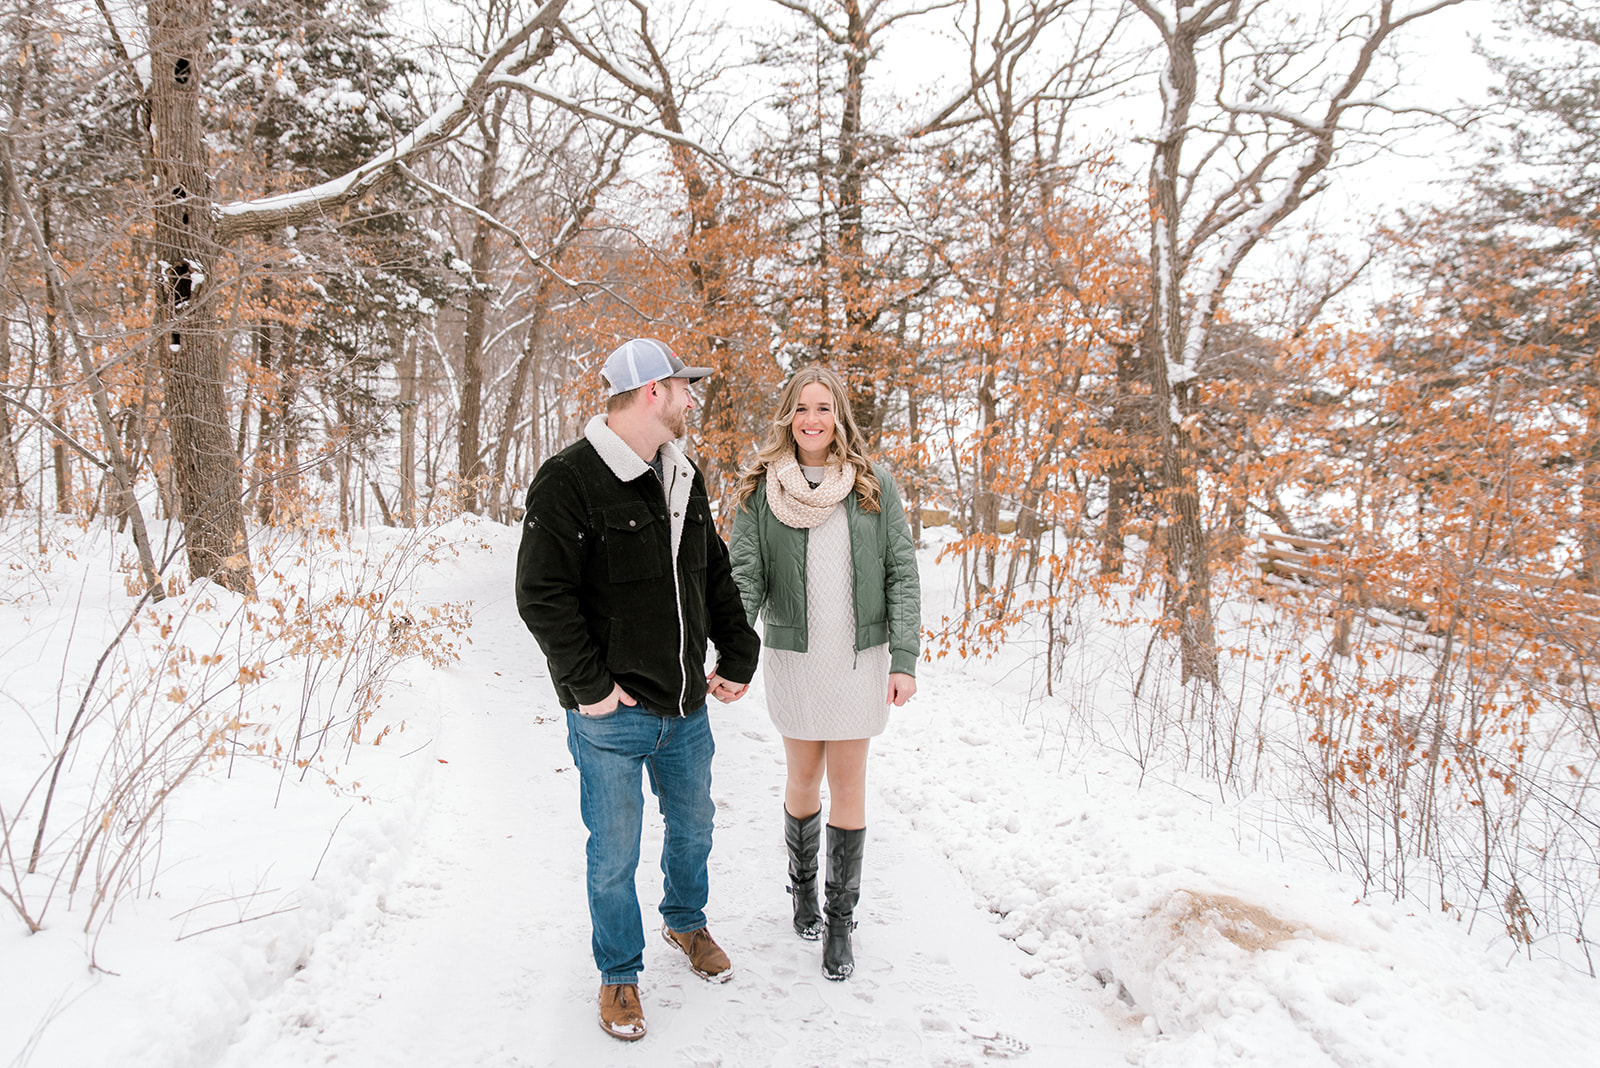 Couple walking in snowy woods during their winter engagement photo session